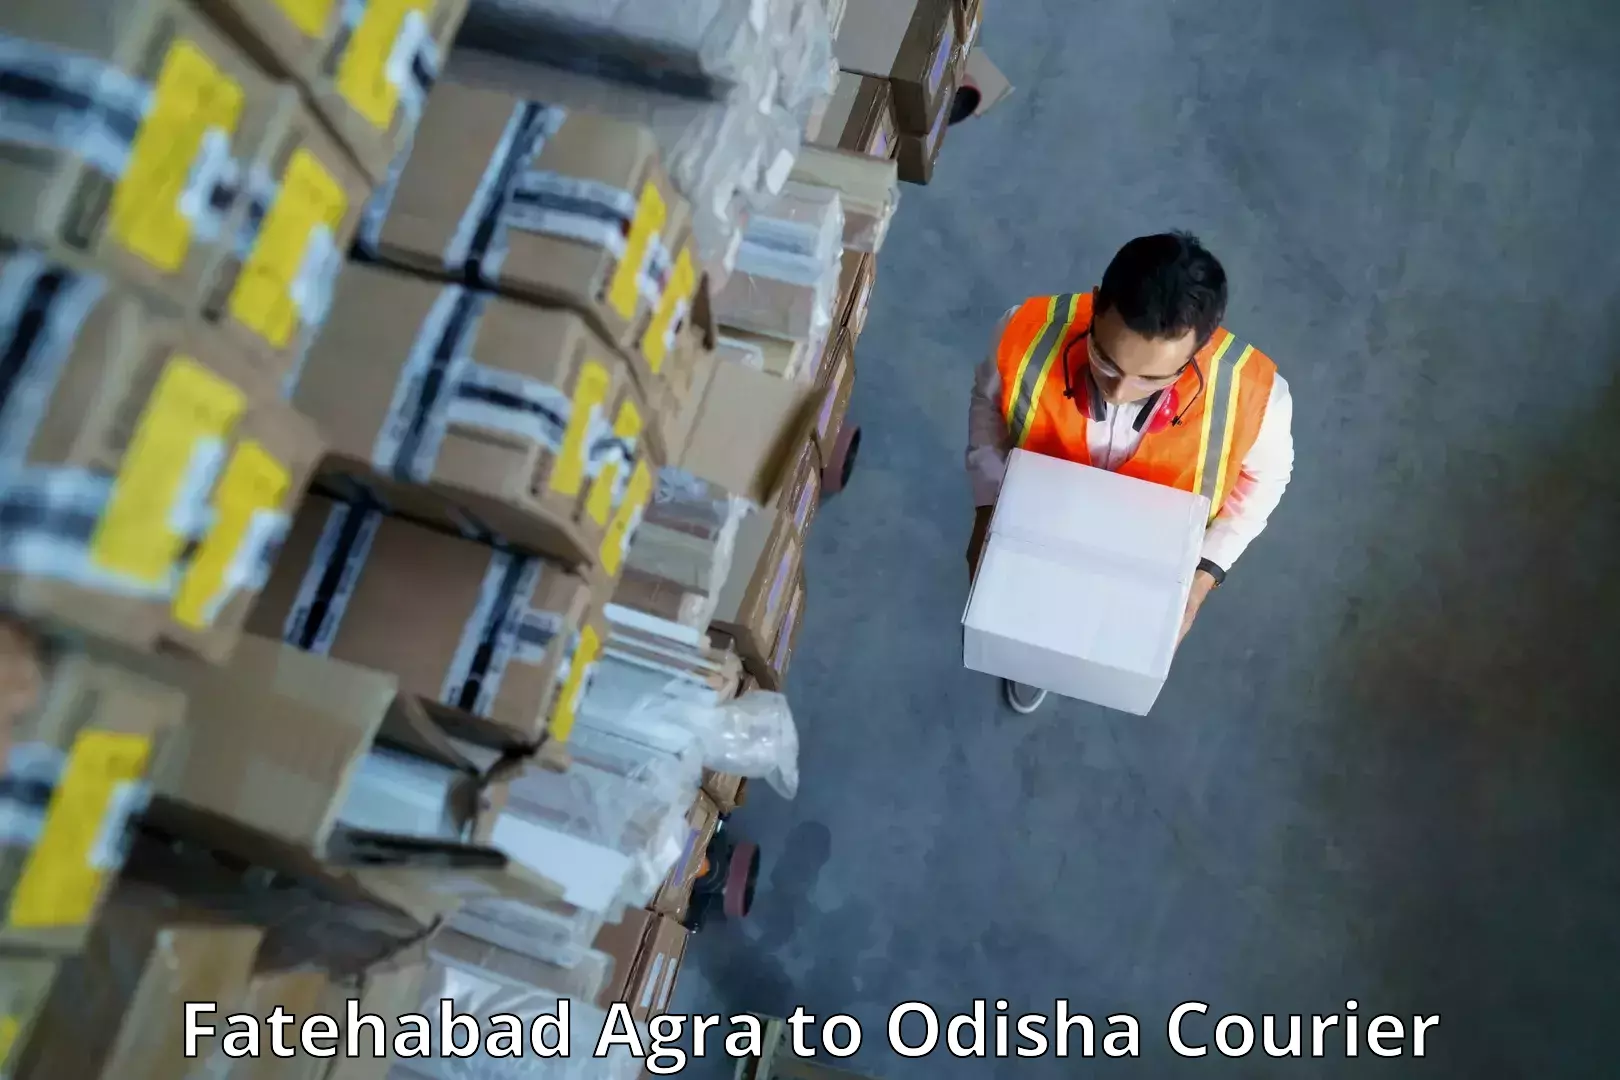 Supply chain efficiency in Fatehabad Agra to Nabarangpur